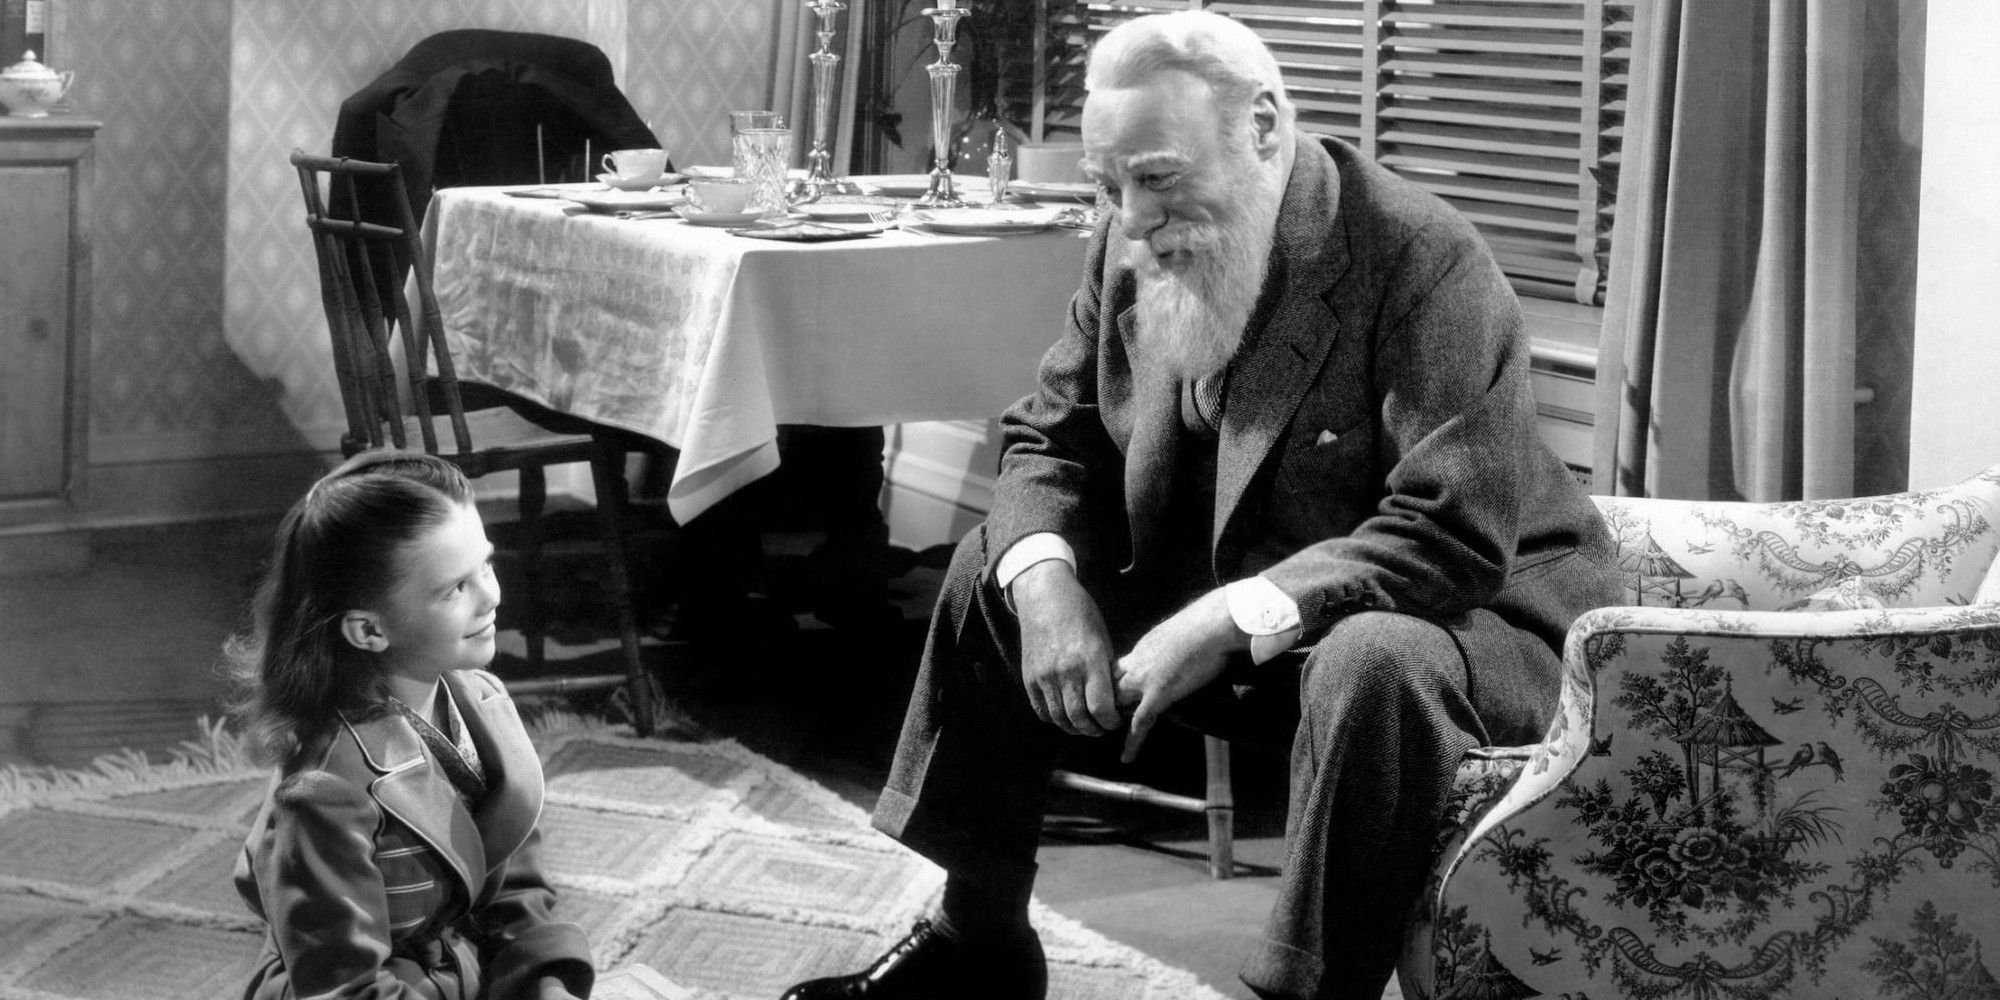 Kris sits in a chair and Suzie sits on the floor in Miracle on 34th Street